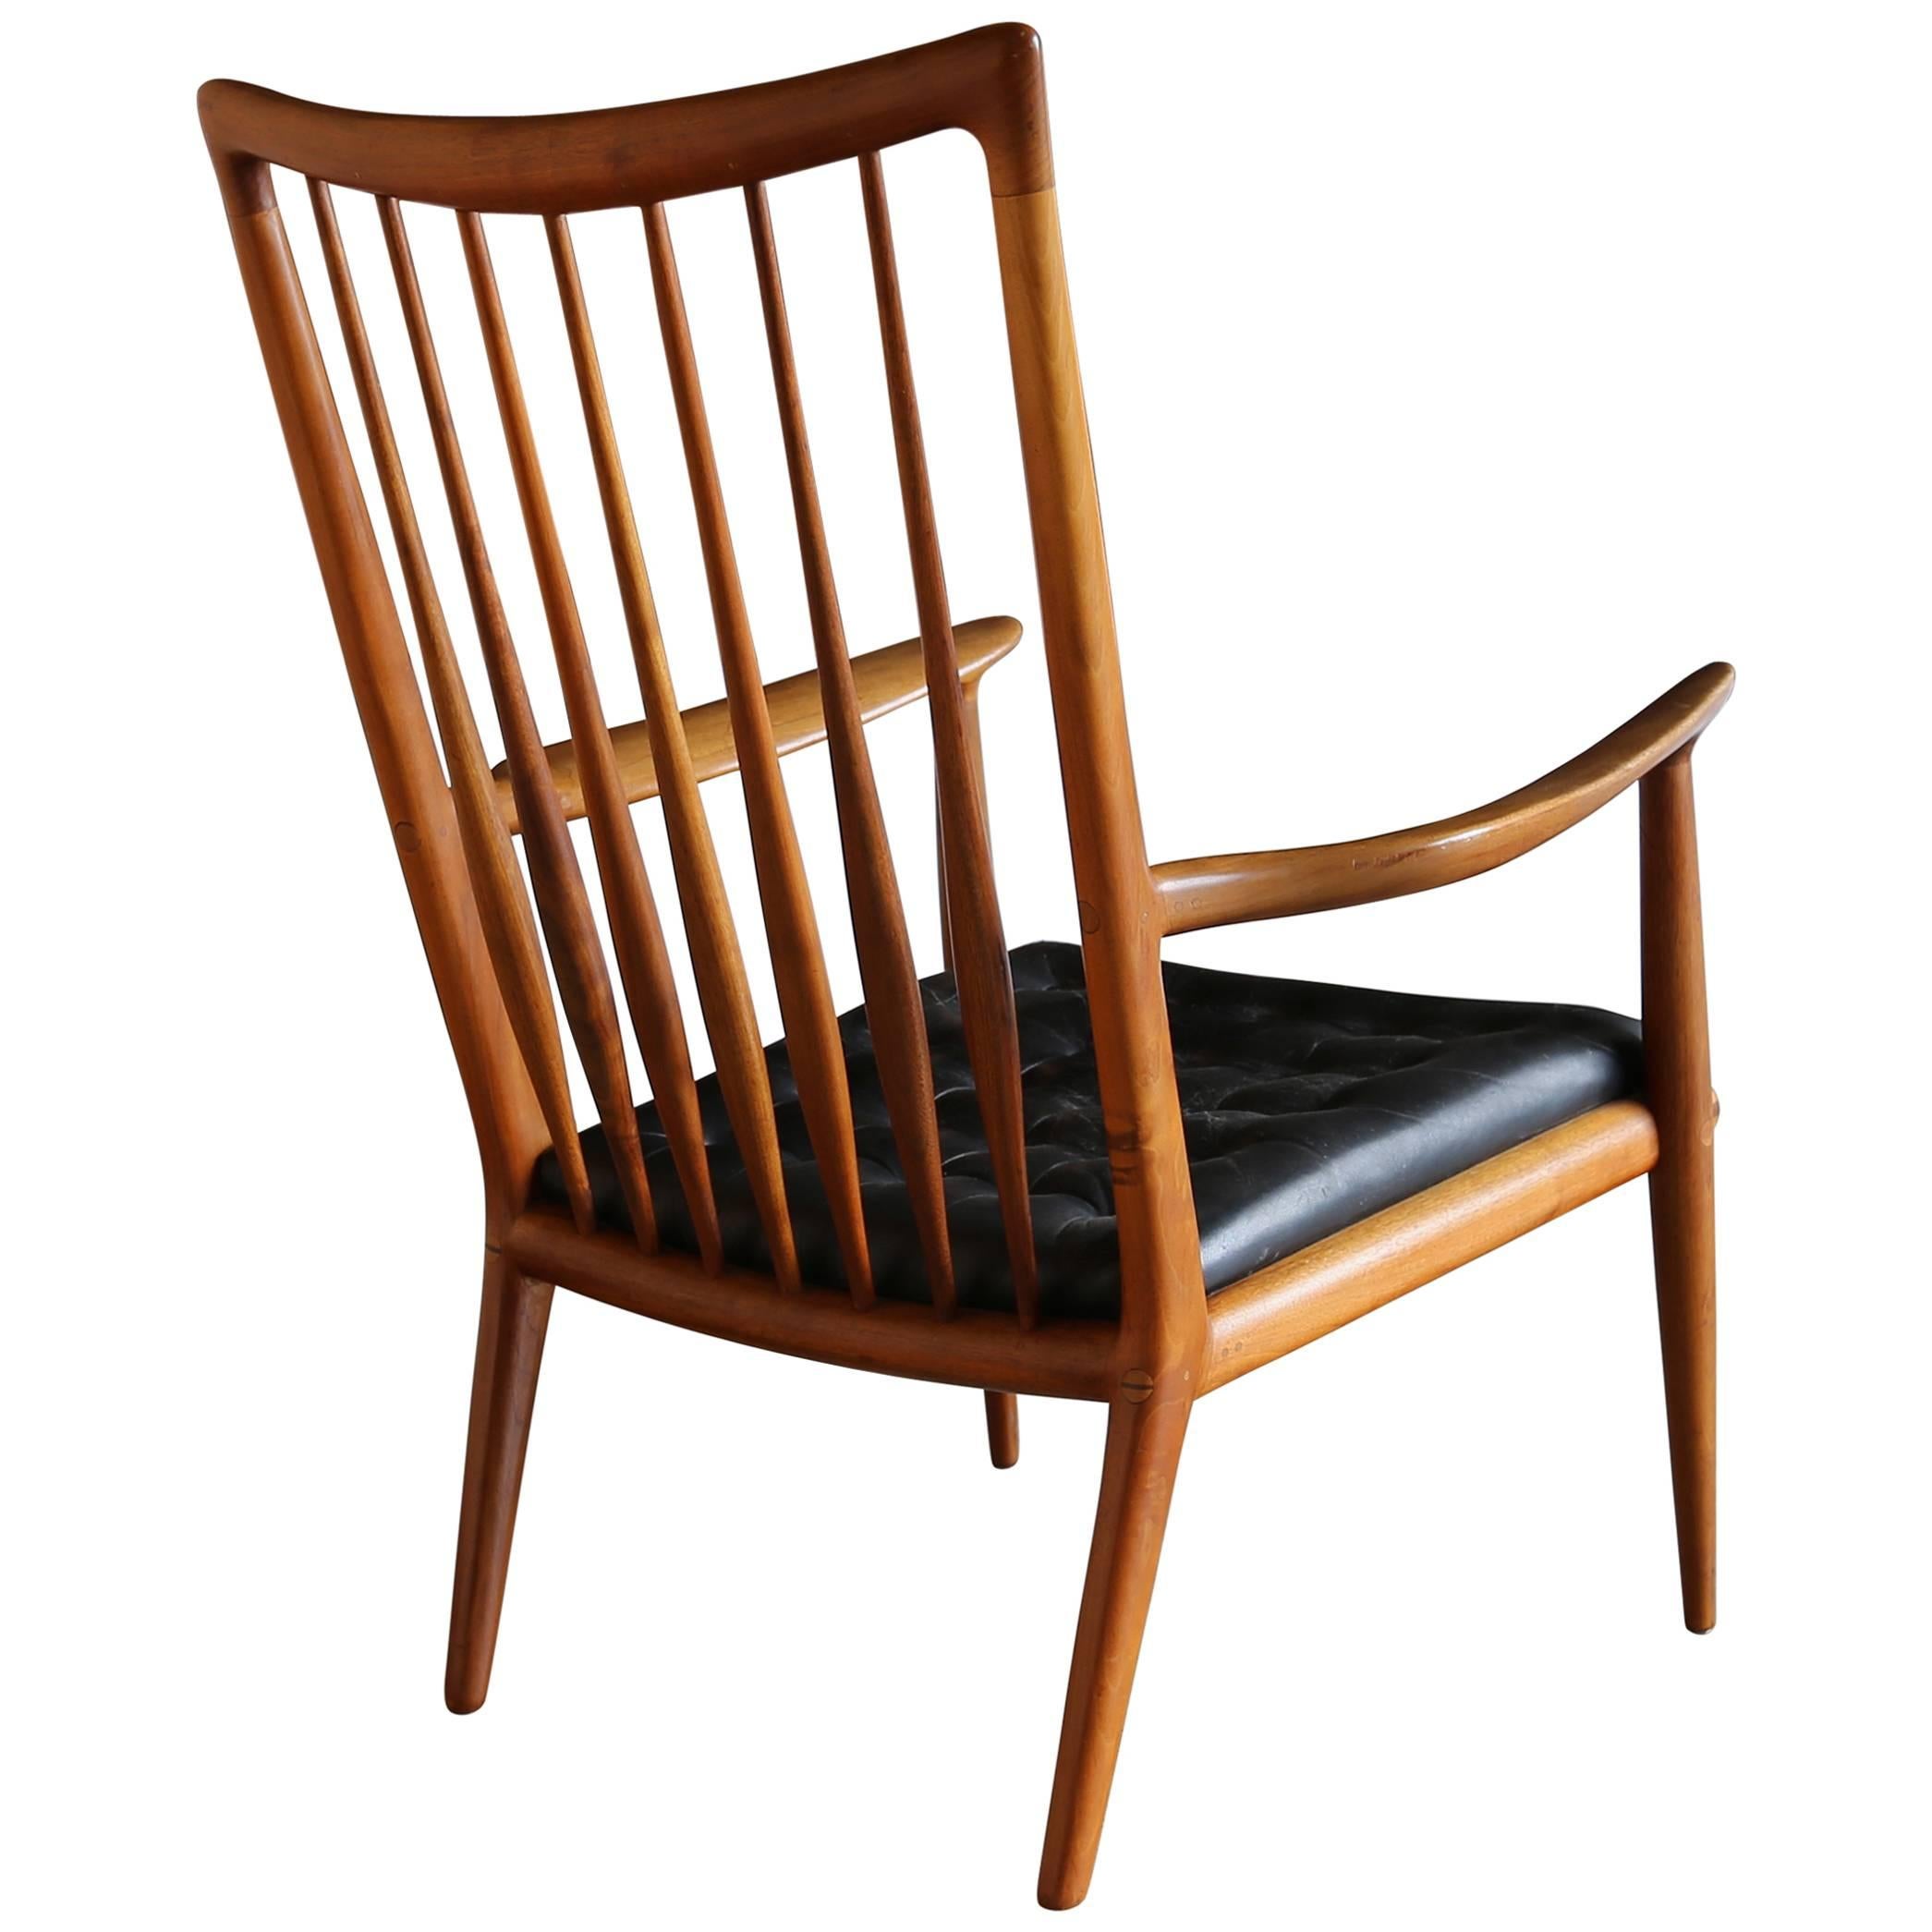 Studio Crafted Lounge Chair by Sam Maloof